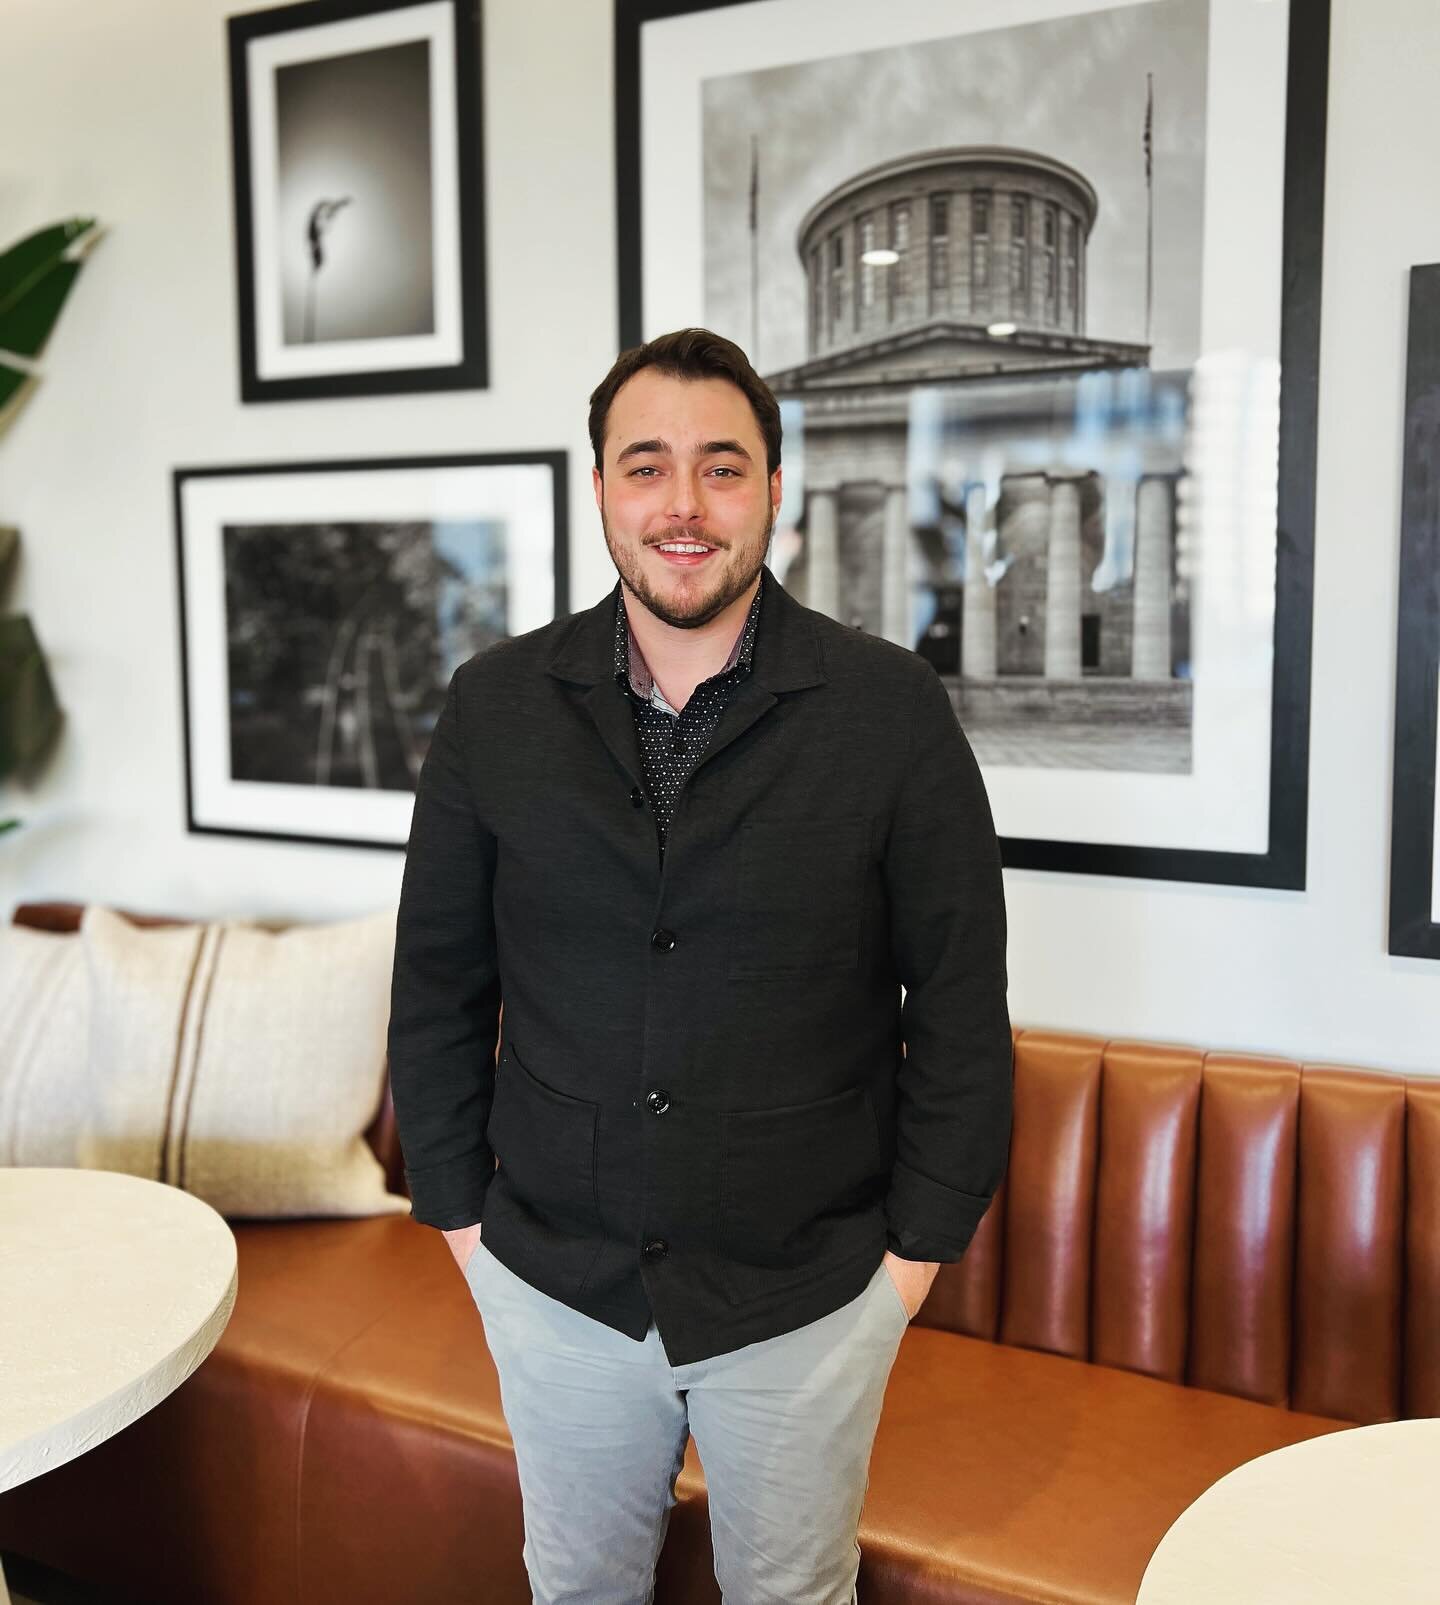 ✨ Hey there, I'm Luke! 

🔑Your dedicated Leasing Consultant ready to guide you through the exciting journey of finding your dream home. 

🌟If you're looking for a cozy and luxurious apartment, I've got you covered! 

🏠 Let's turn your housing drea